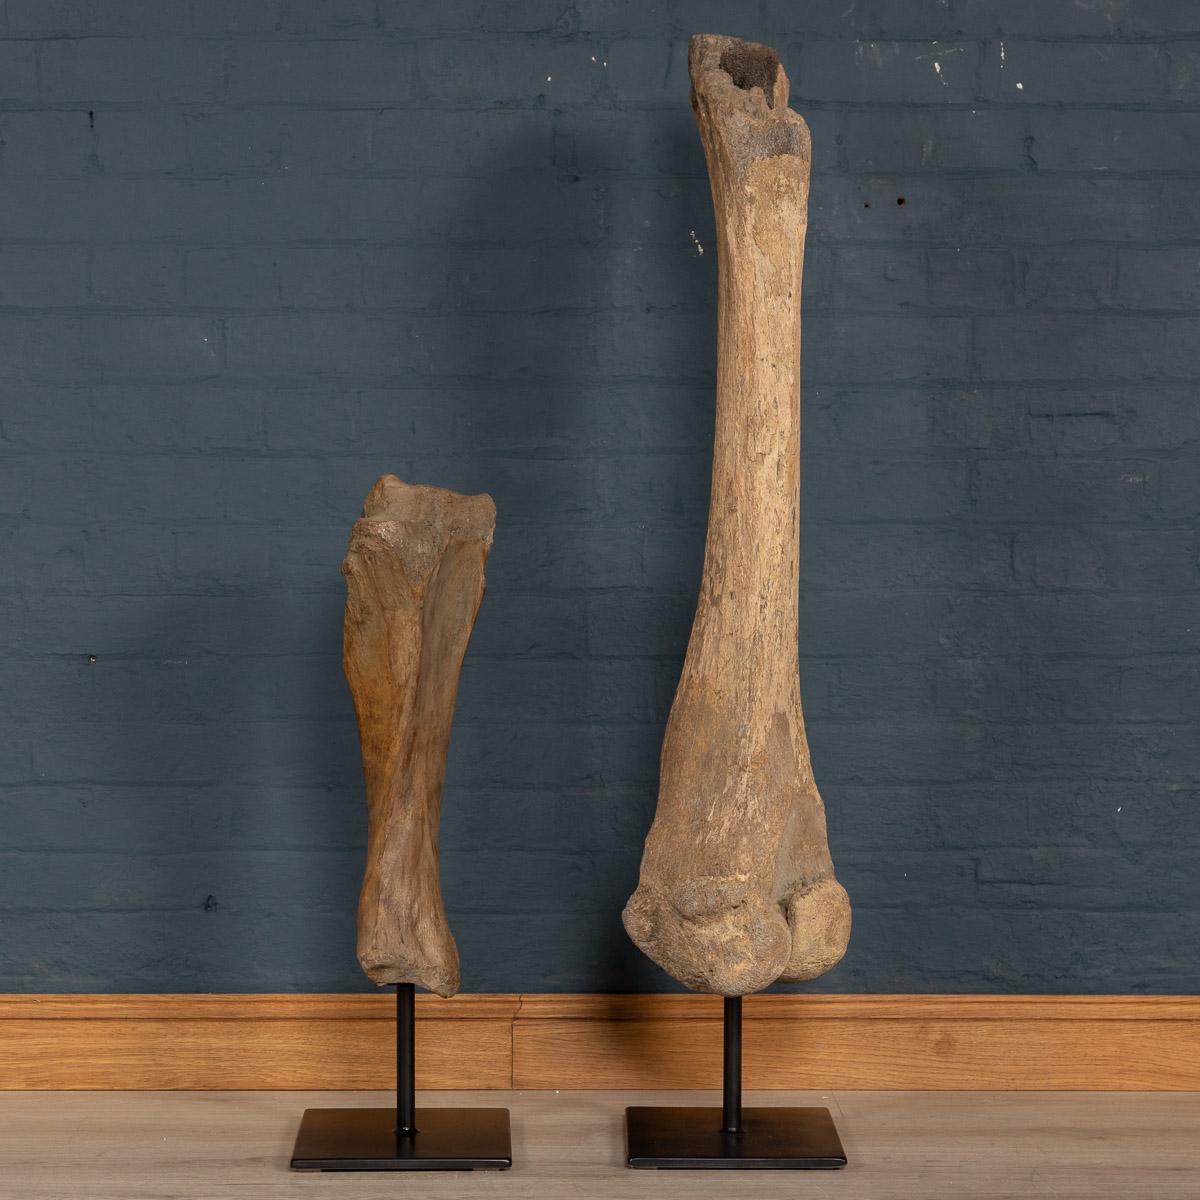 Dating to the pleistocene era (between 12,000 and 2.5 million years ago), this top quality Siberian woolly mammoth femur and tibia bones (Mammuthus primigenius) is in great condition. Partially fossilised in was unearthed in Yakutia (Siberia). This